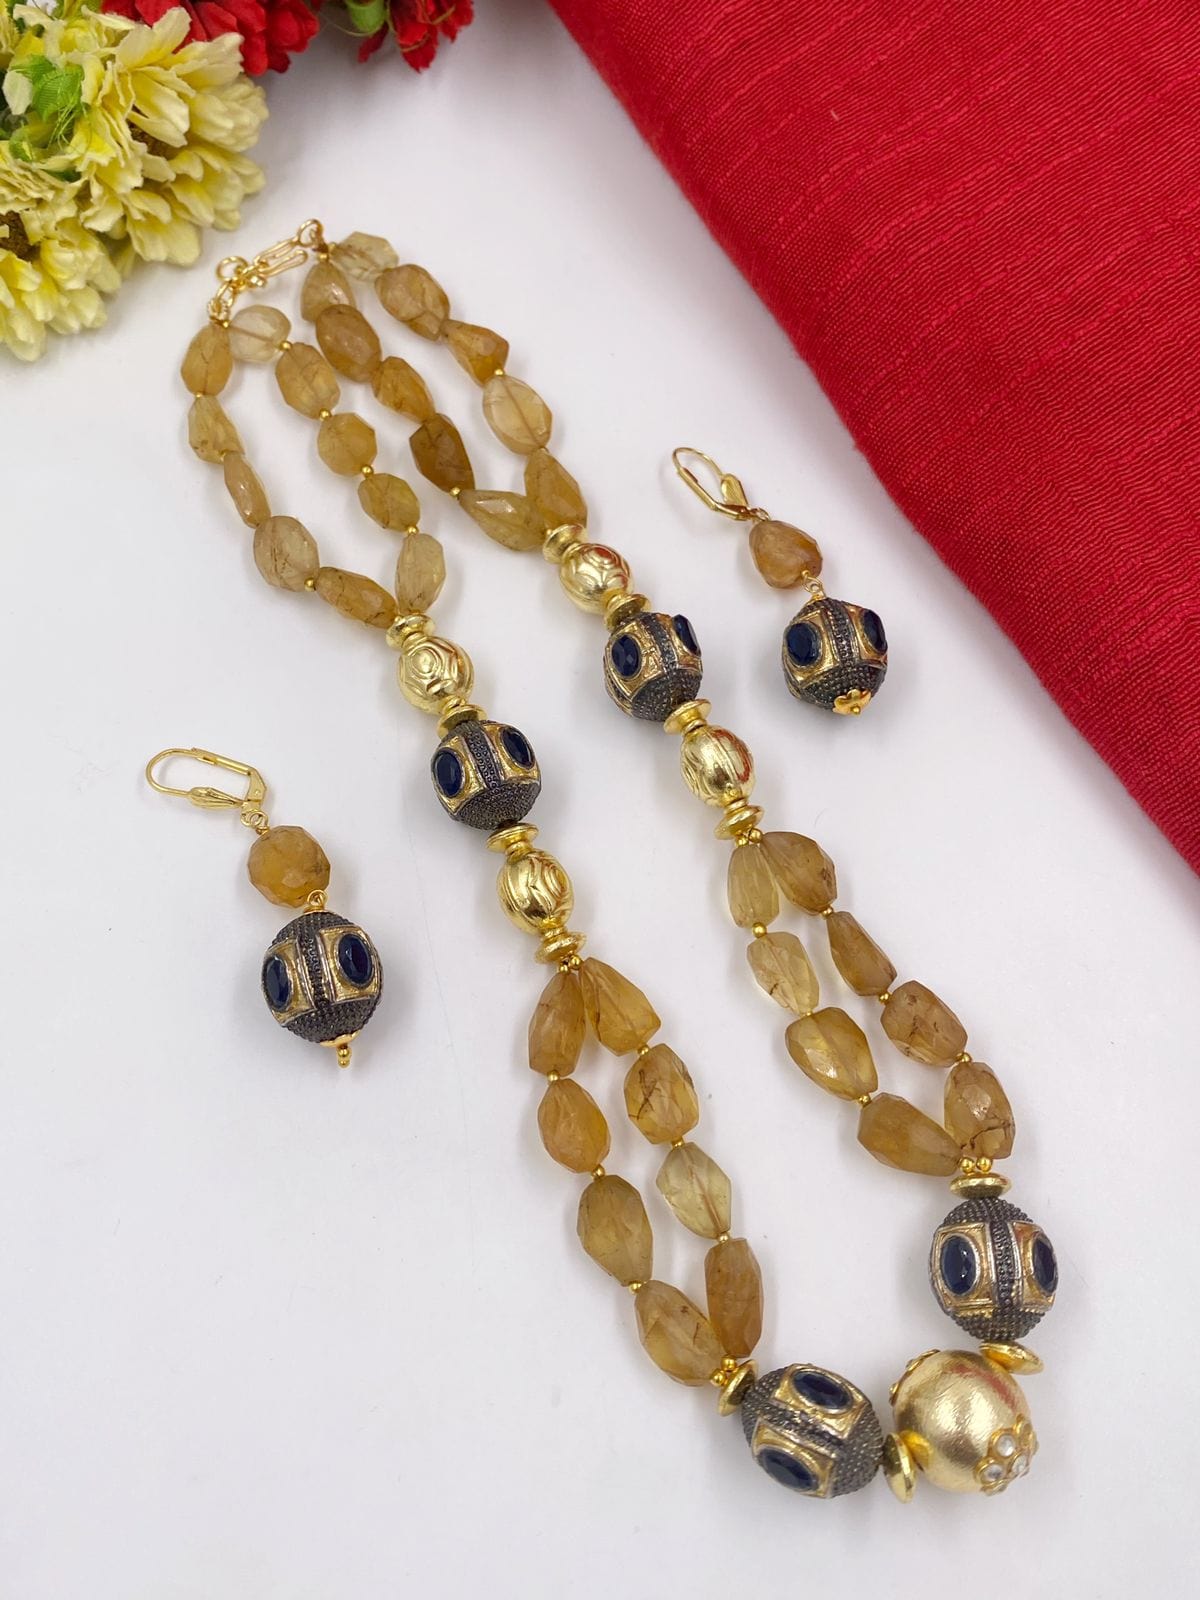 Designer Semi Precious Yellow Citrine Layered Beads Necklace For Women By Gehna Shop Beads Jewellery